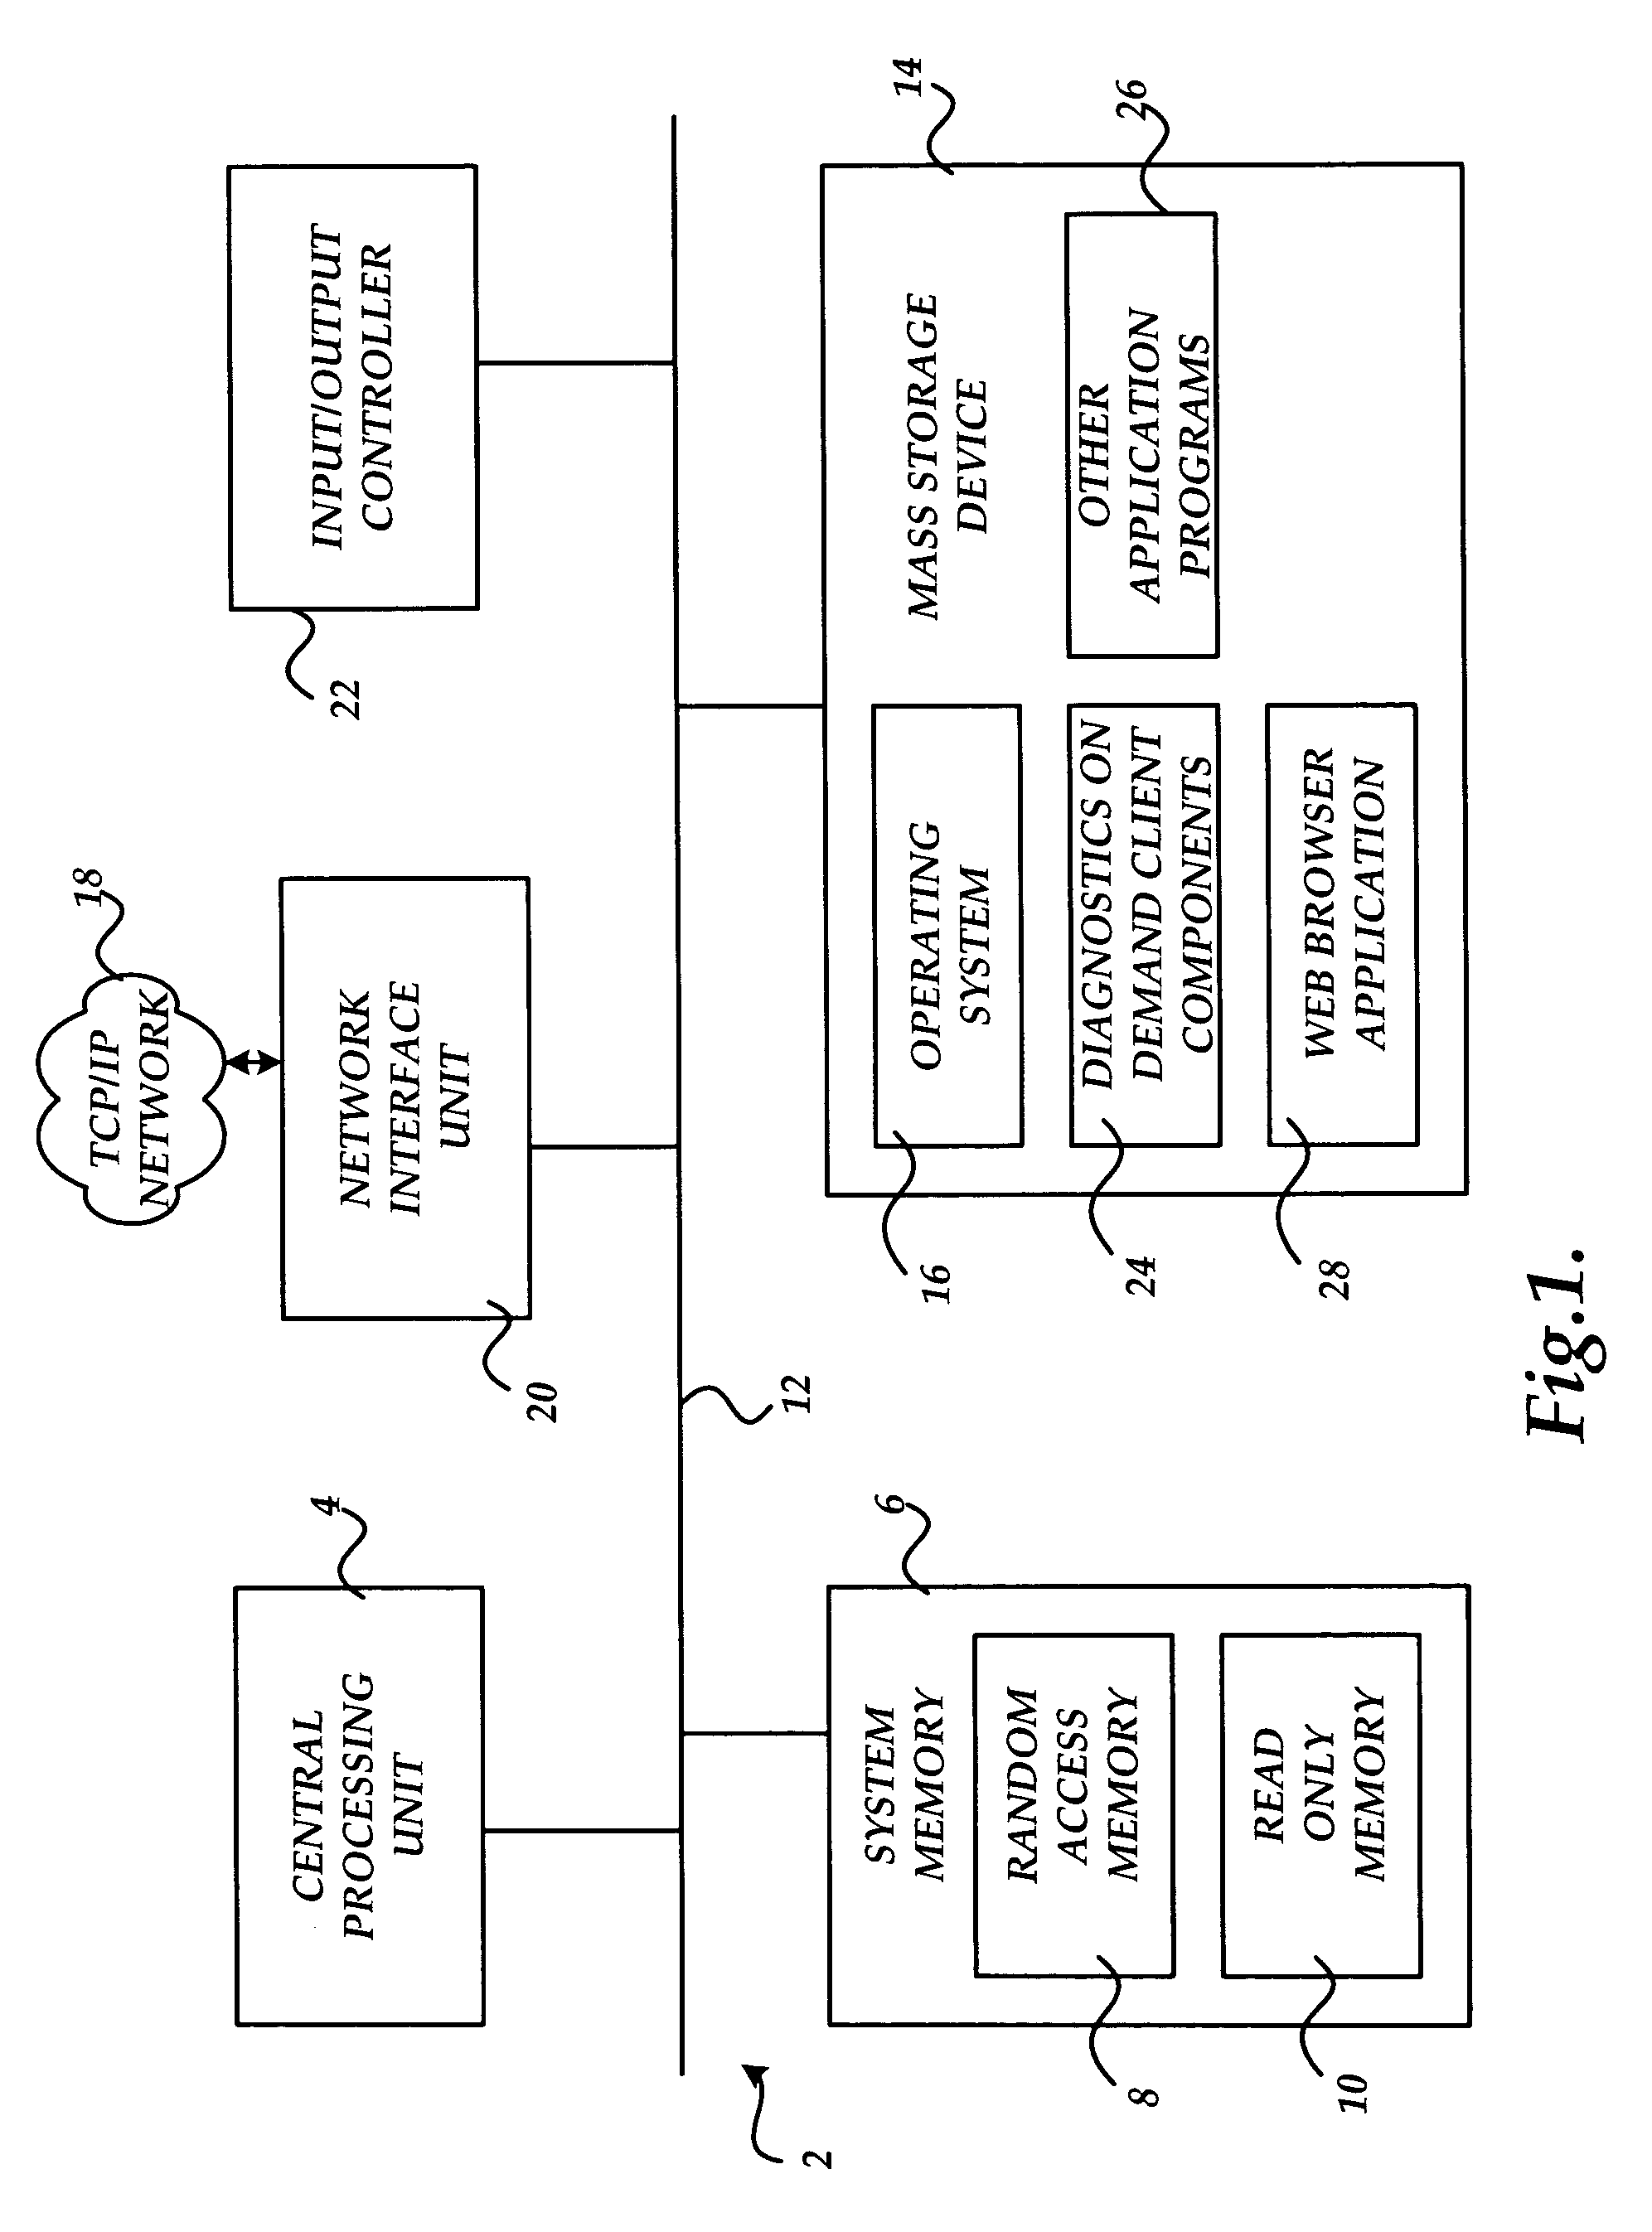 Method, system, and apparatus for providing a single diagnostics module on-demand